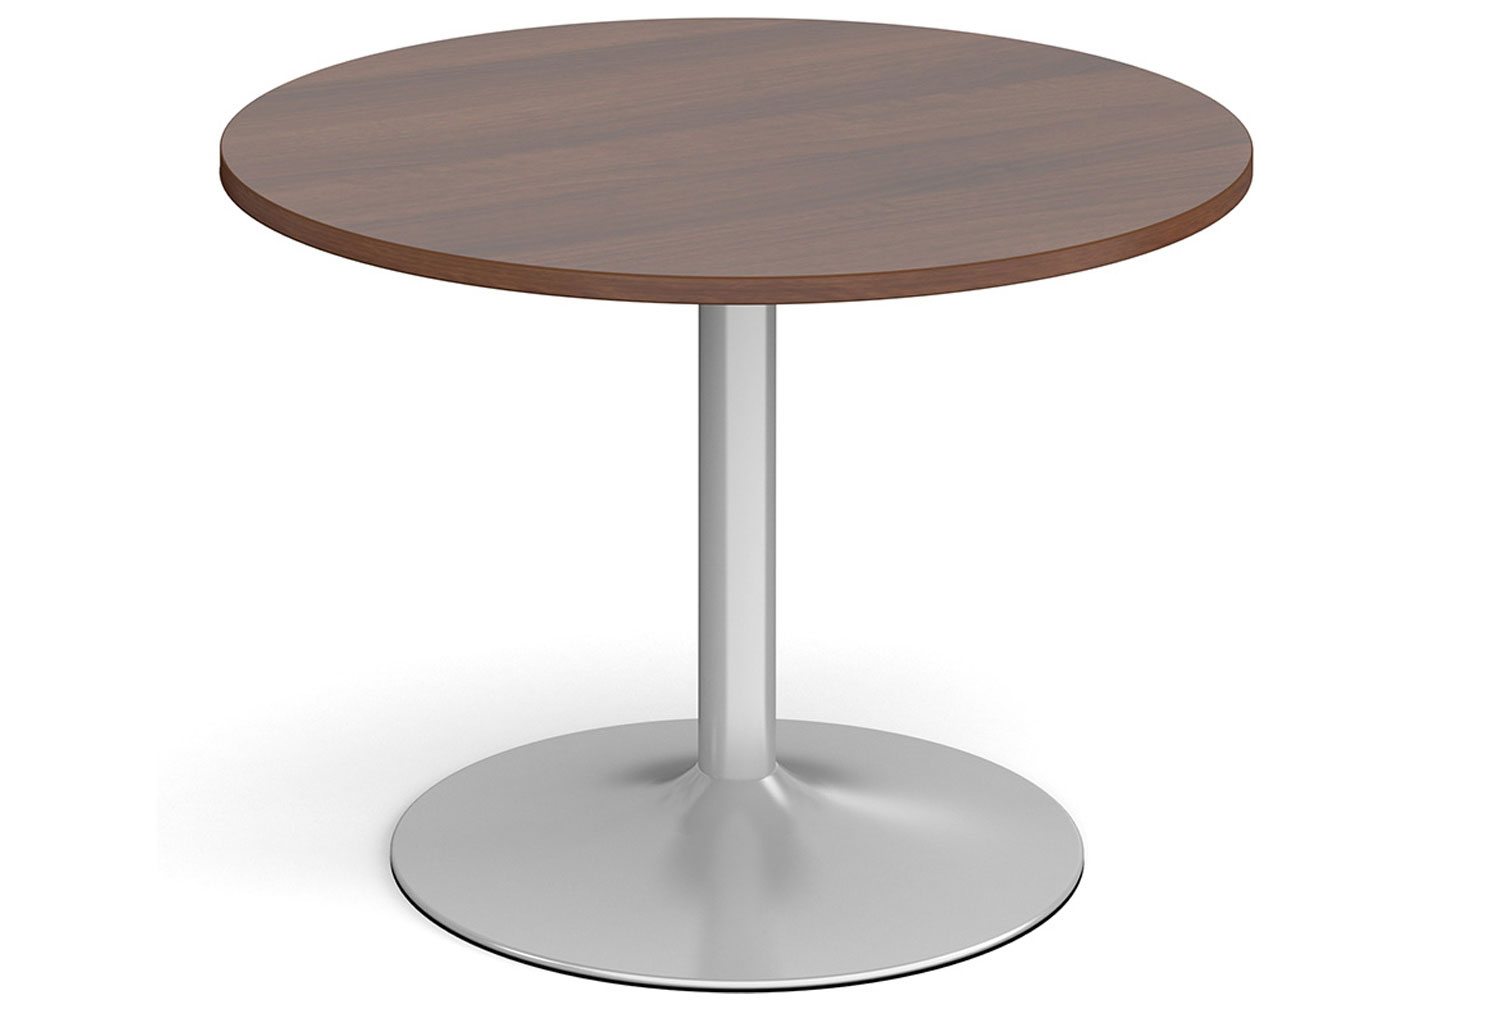 Wolfe Round Boardroom Table, 100diax73h (cm), Walnut